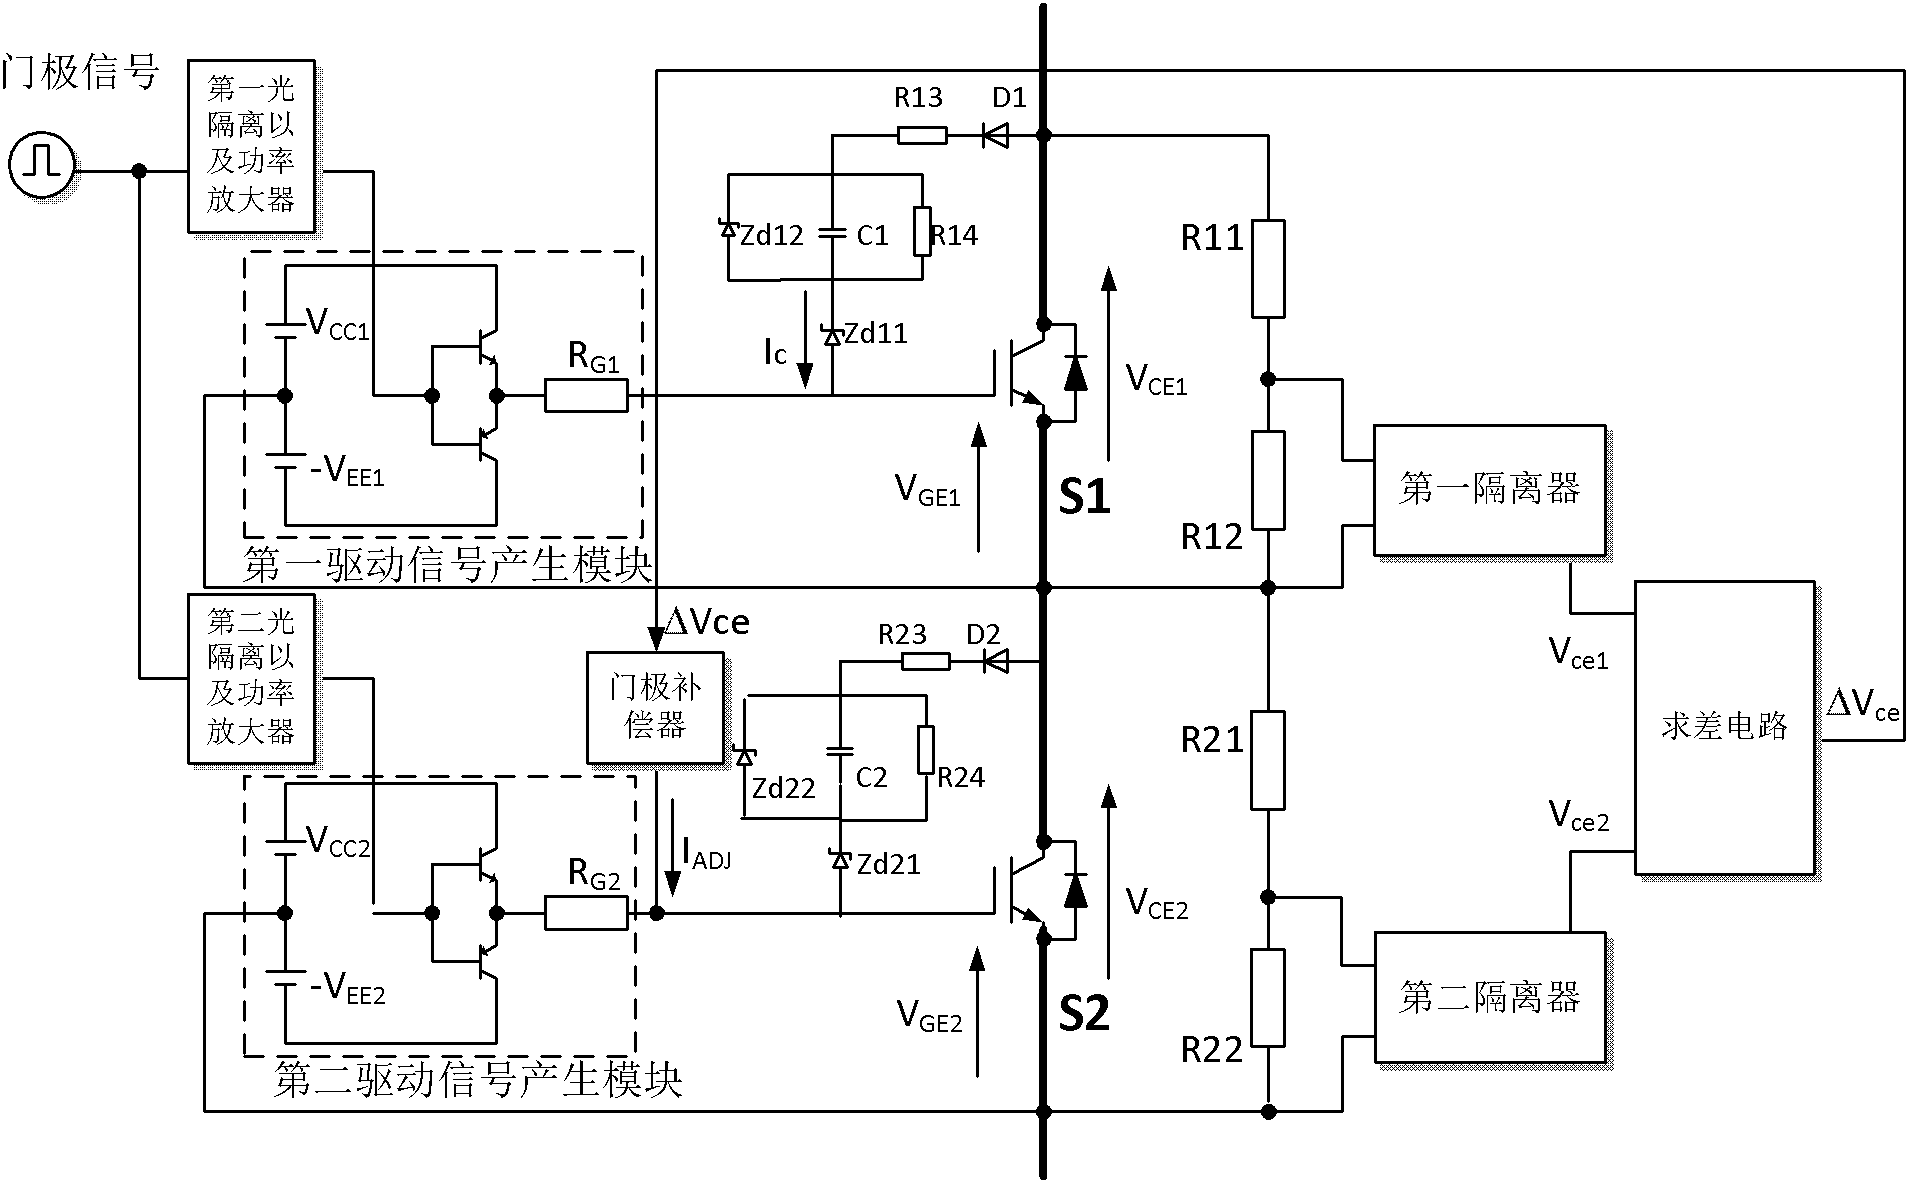 A voltage equalization control circuit with insulated gate bipolar transistors running in series